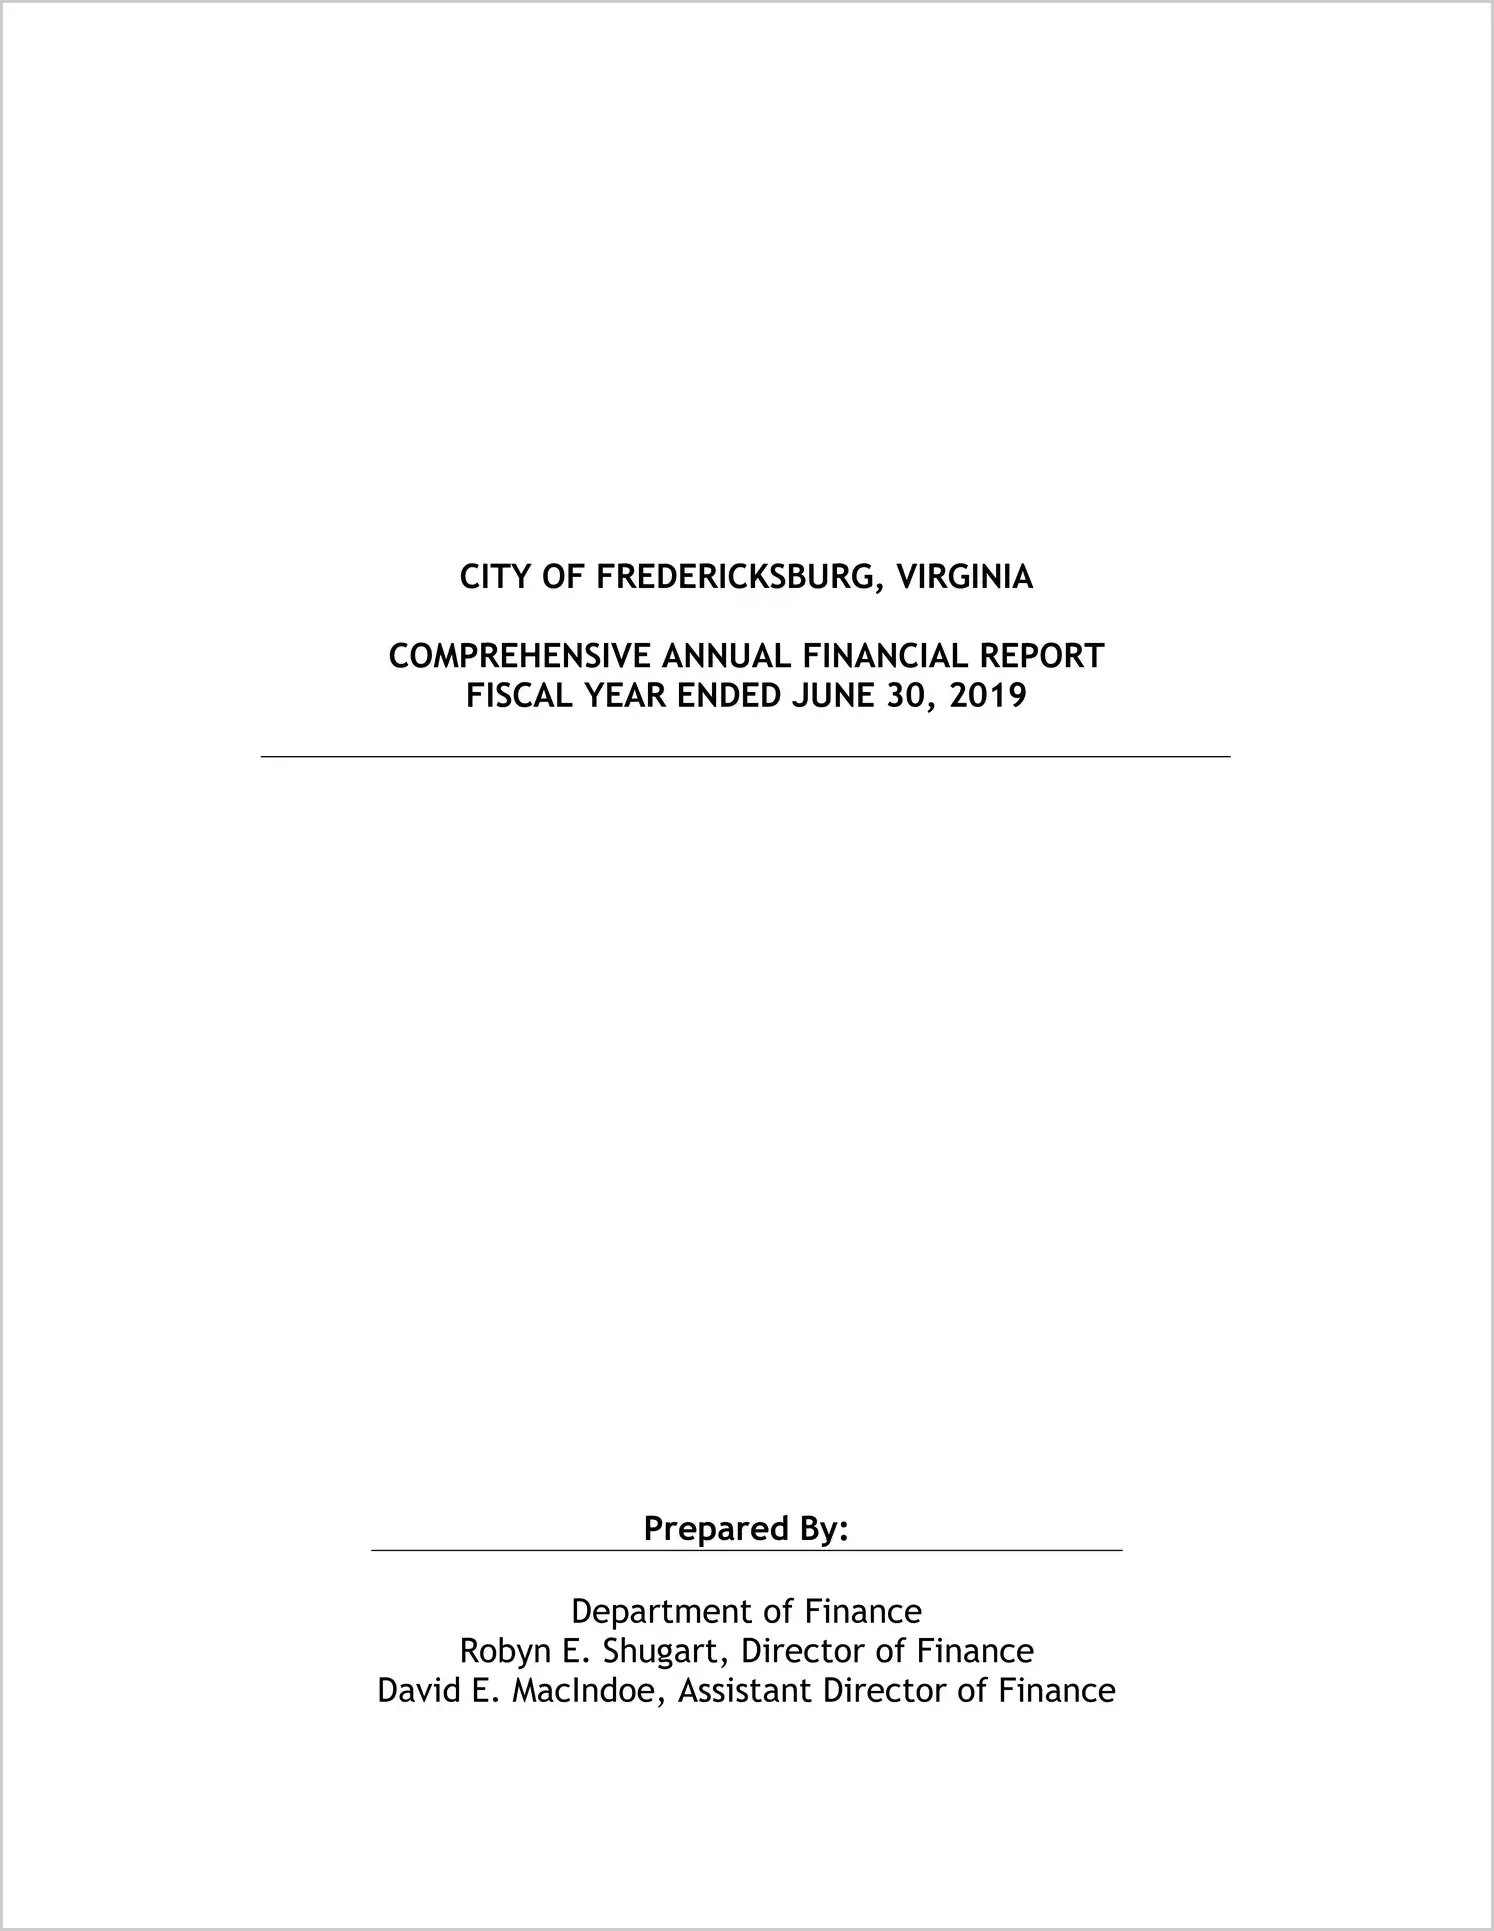 2019 Annual Financial Report for City of Fredericksburg